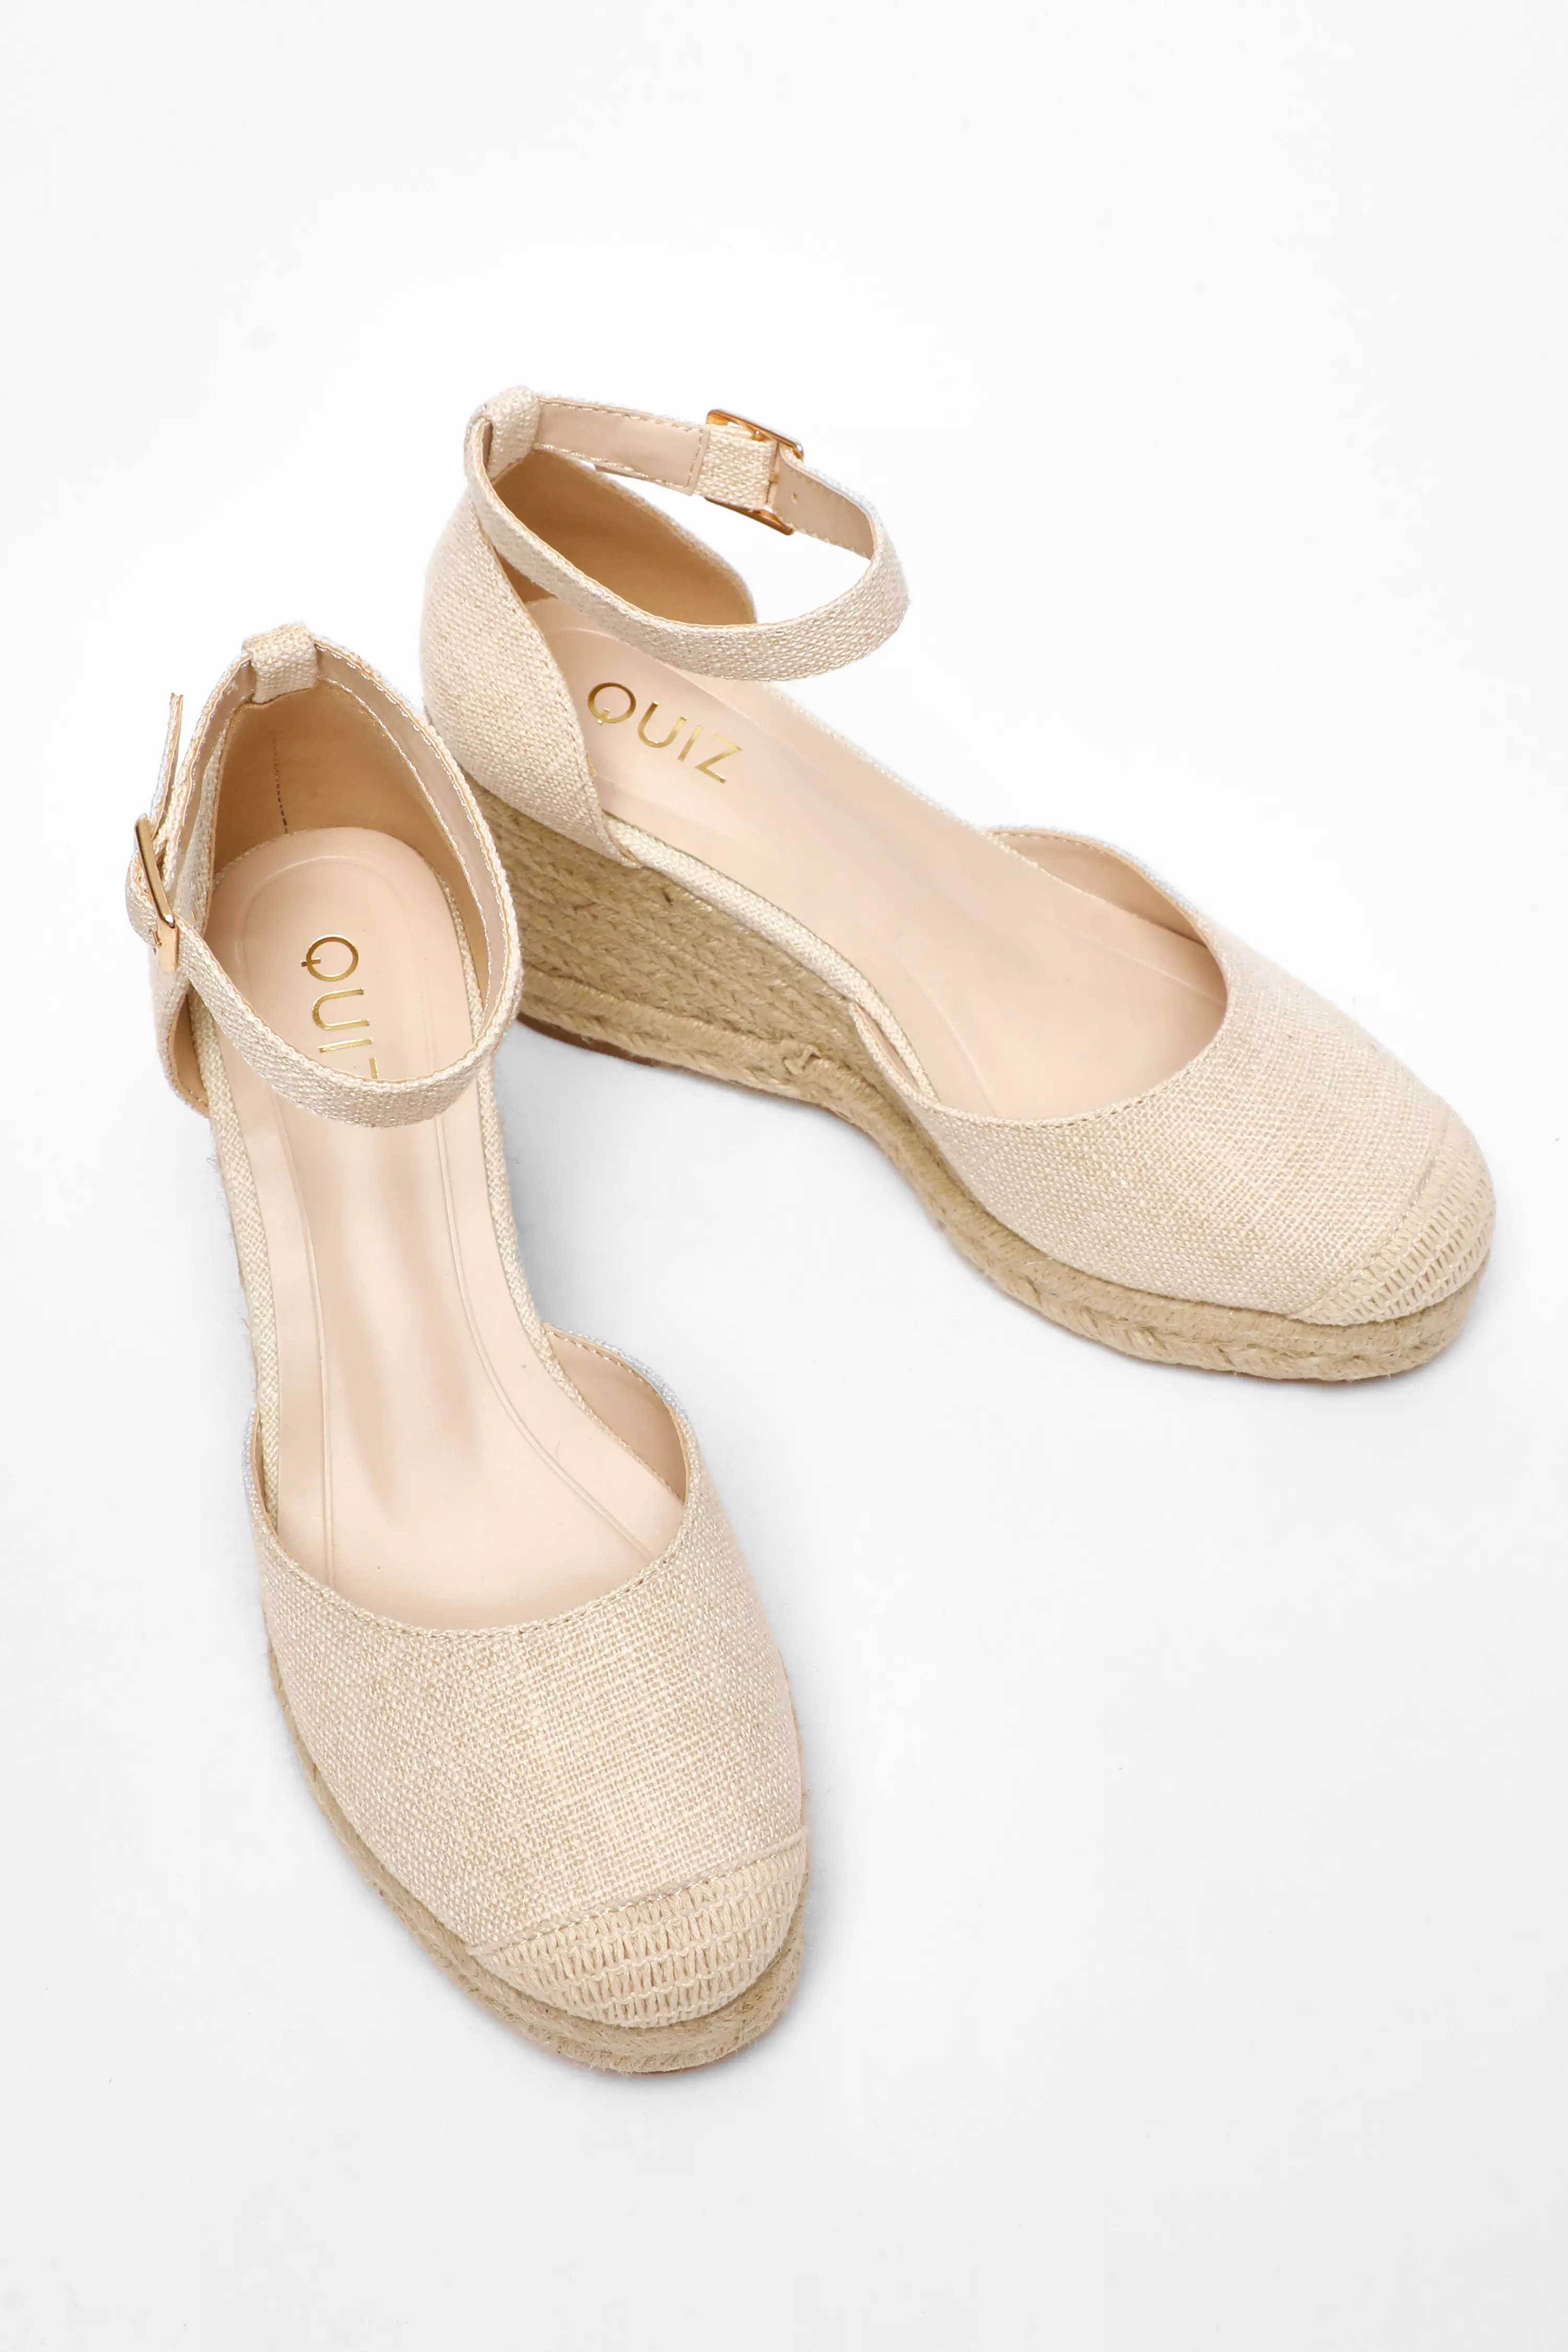 Natural Woven High Wedges